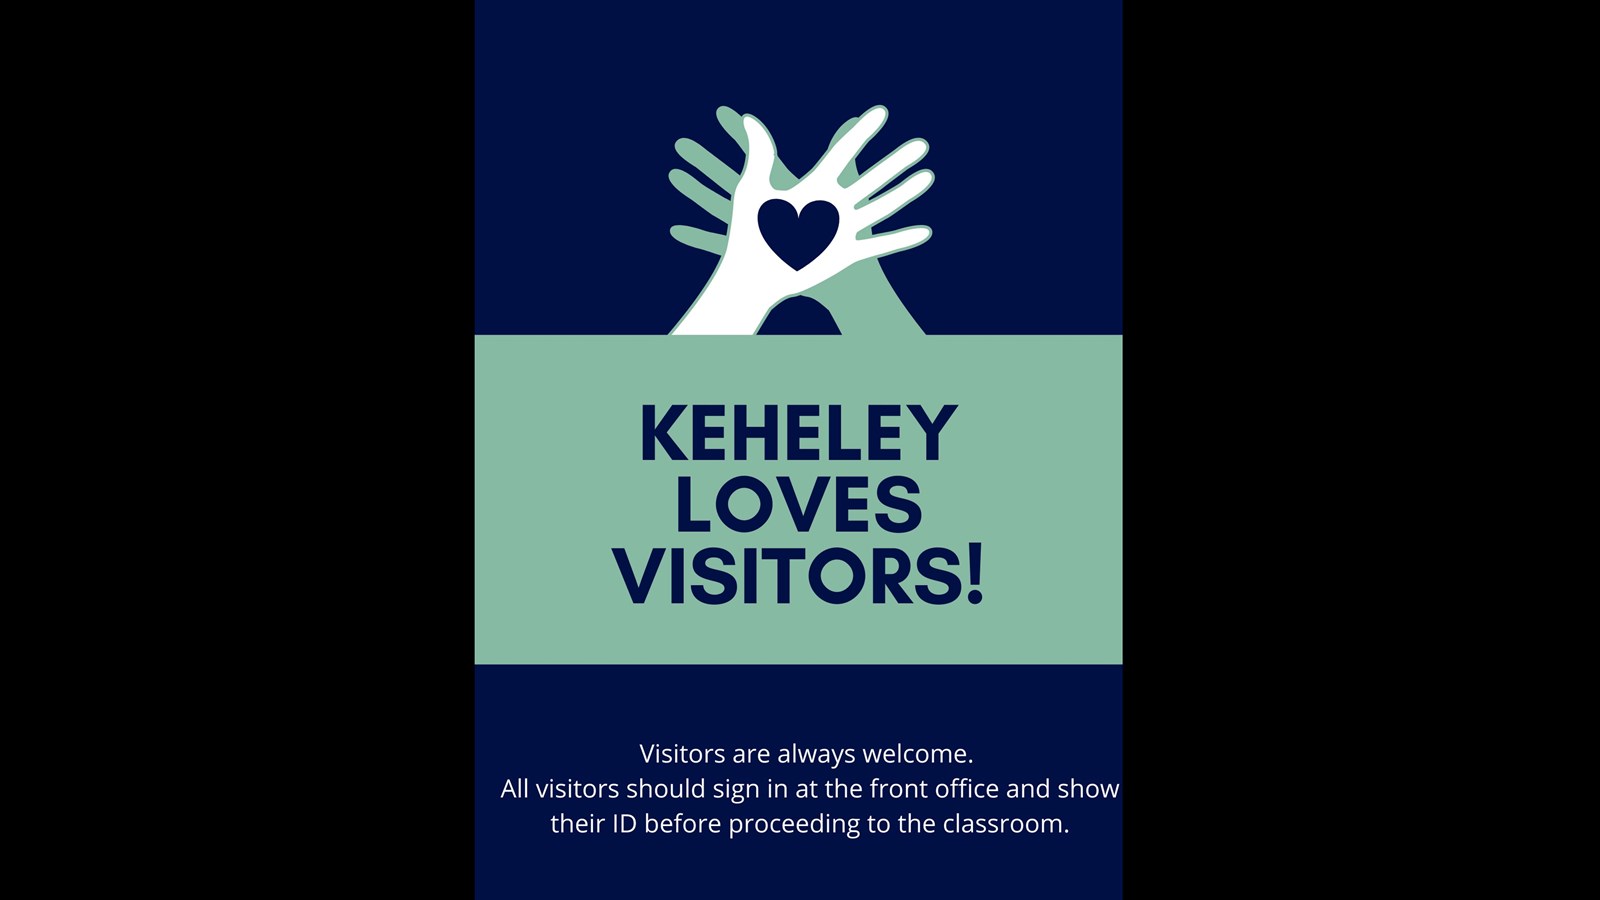 Navy blue background with words on teal that say: Keheley loves visitors! Visitors are always welcome. All visitors should sign in at the front office and show their ID before proceeding to the classroom.